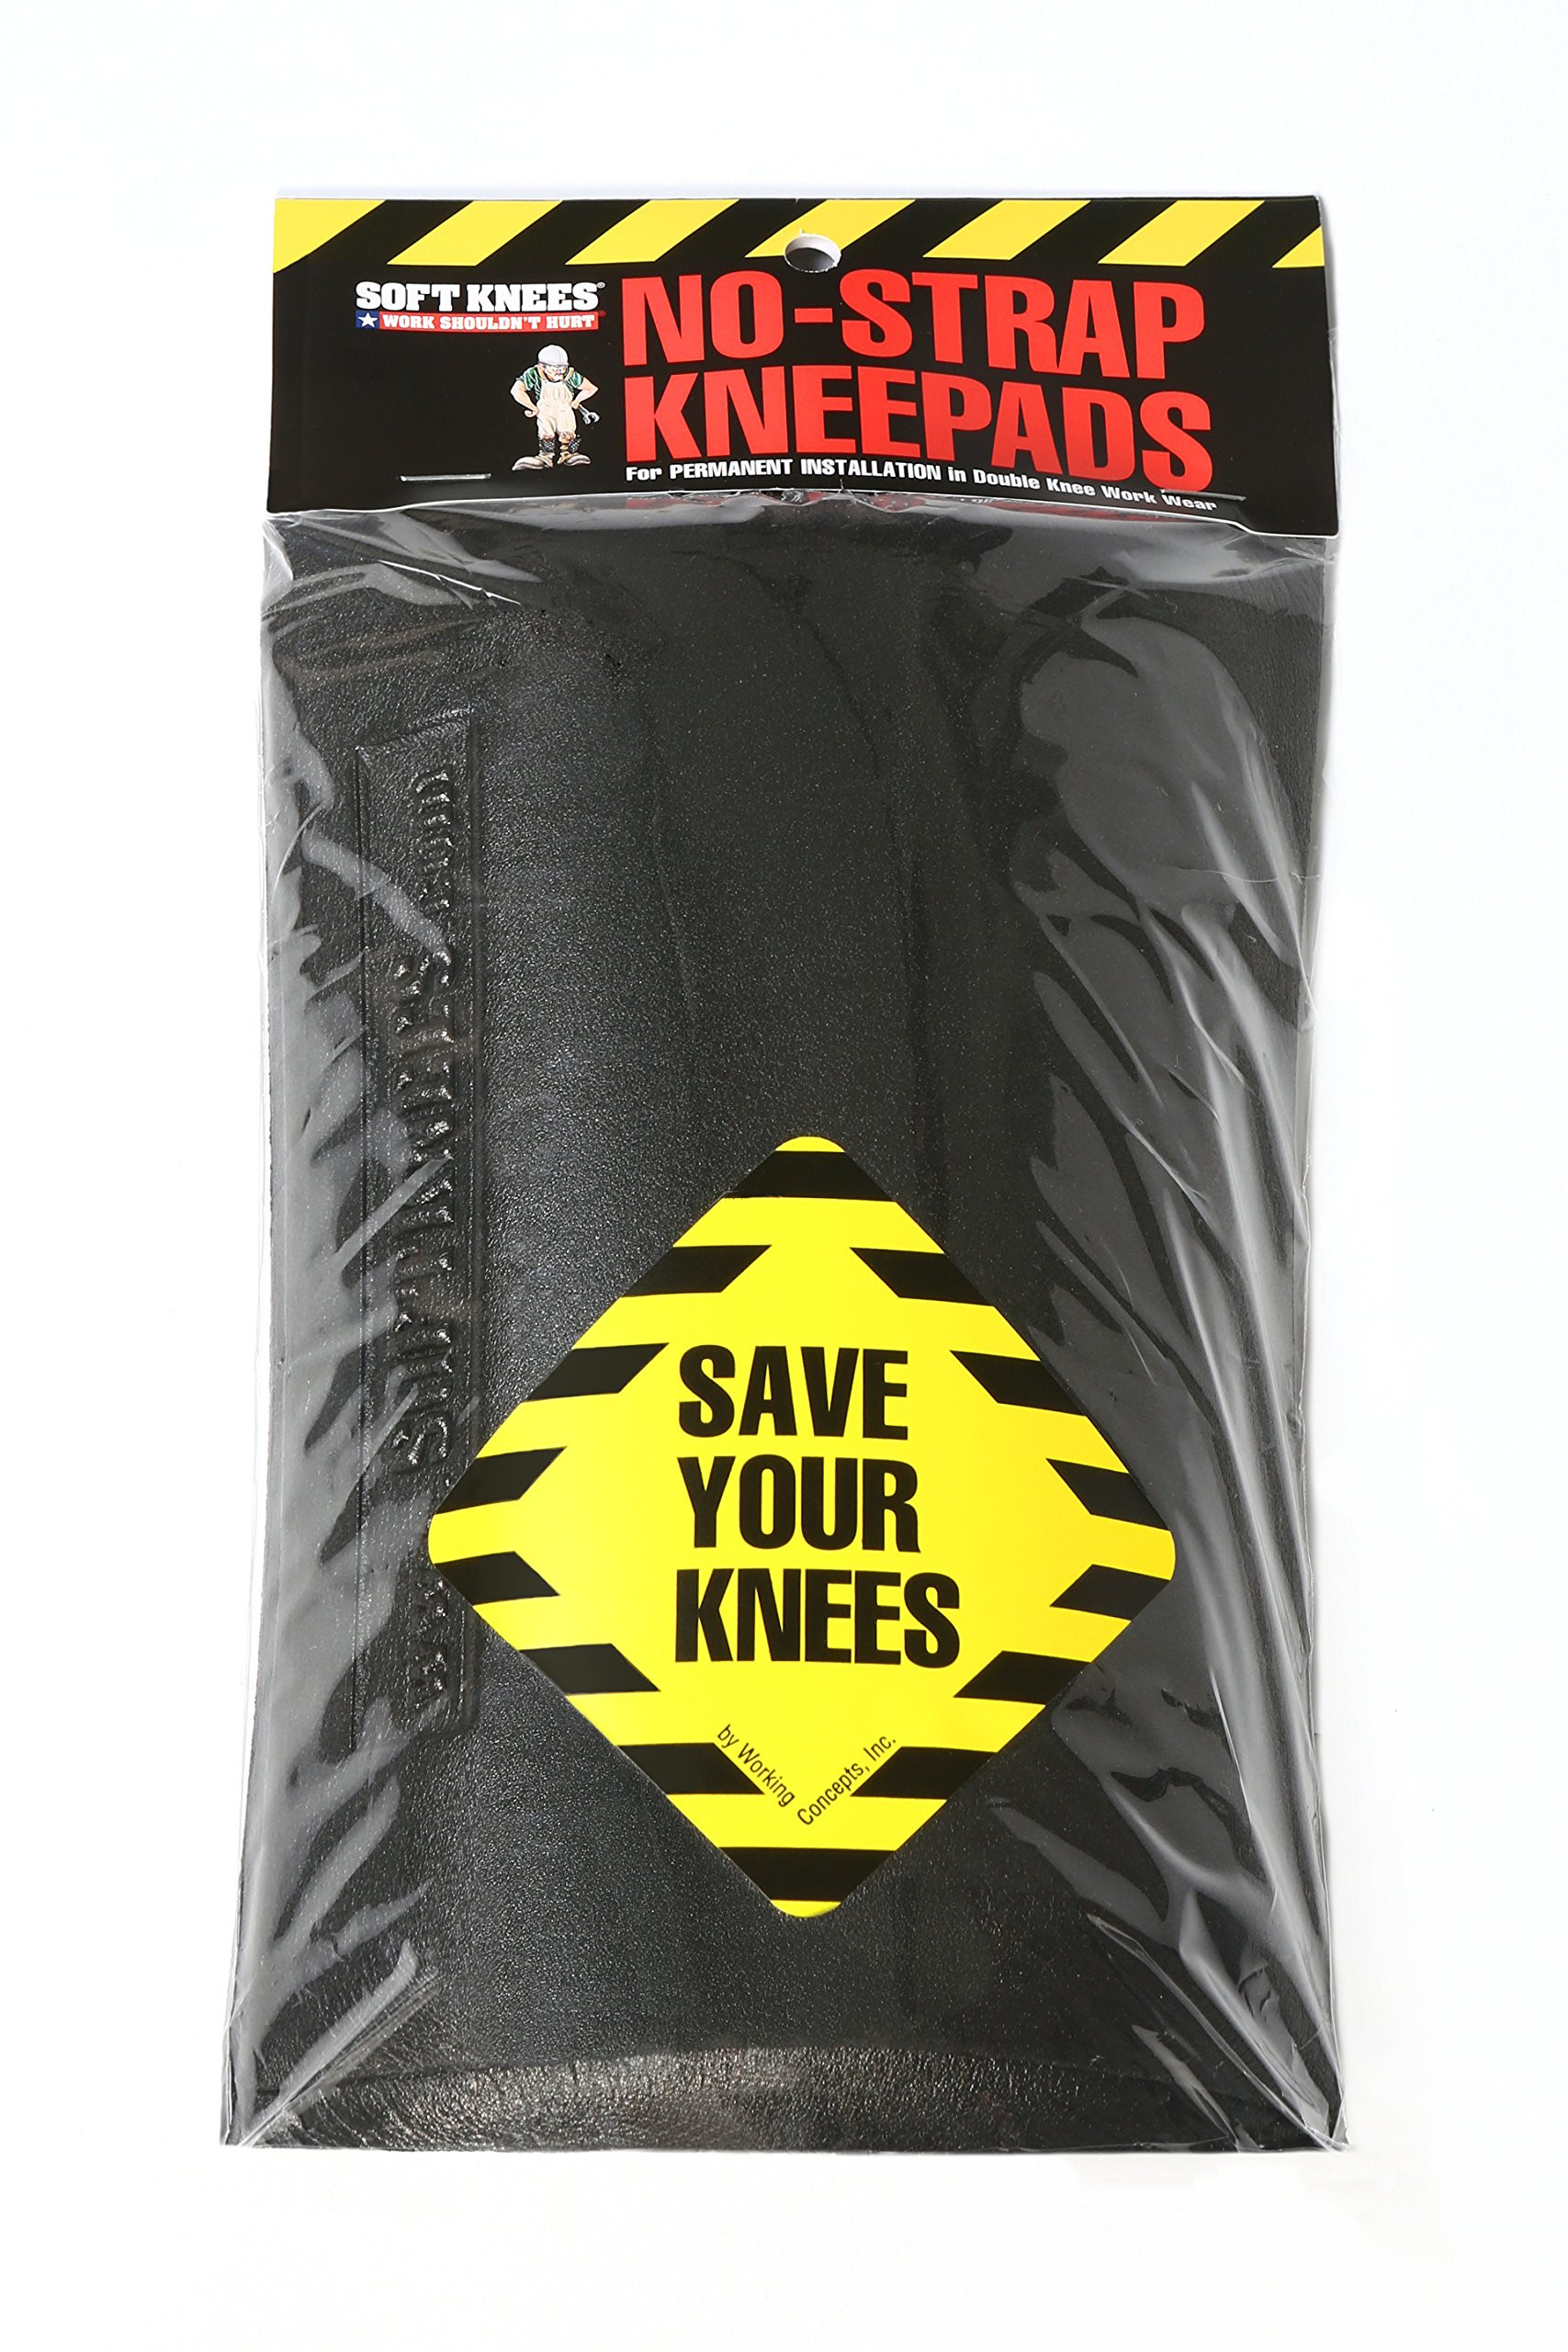 13 Lovable Best Knee Pads for Hardwood Flooring 2024 free download best knee pads for hardwood flooring of best rated in safety kneepads helpful customer reviews amazon com with soft knees easily installed no strap knee pads for those who frequently kneel